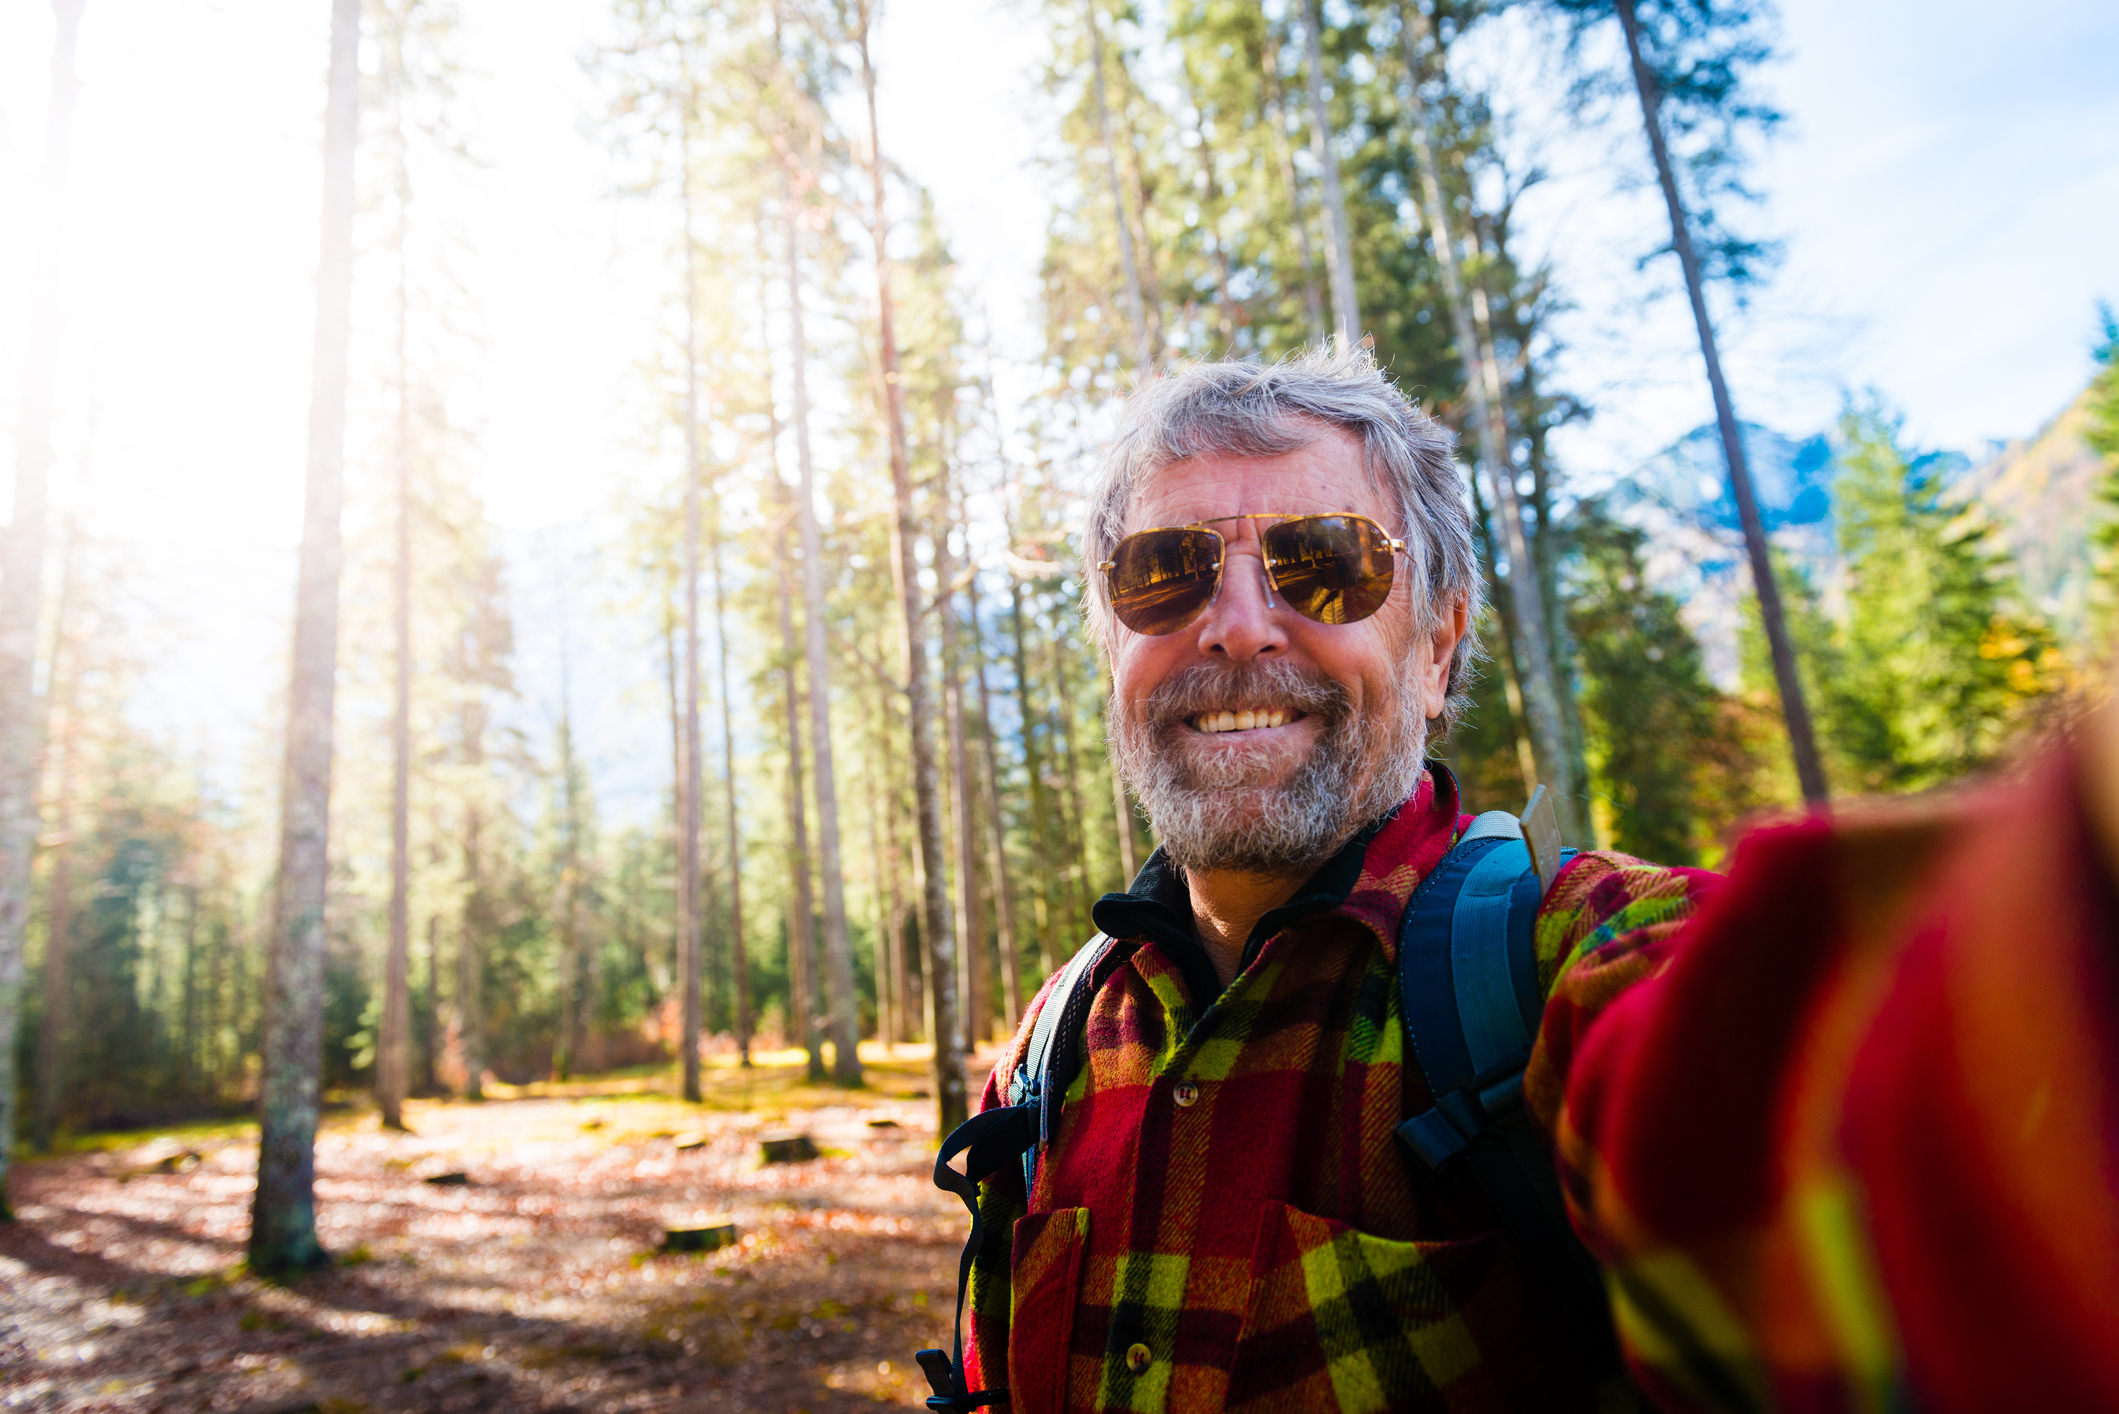 An older man in sunglasses taking a selfie in the forest